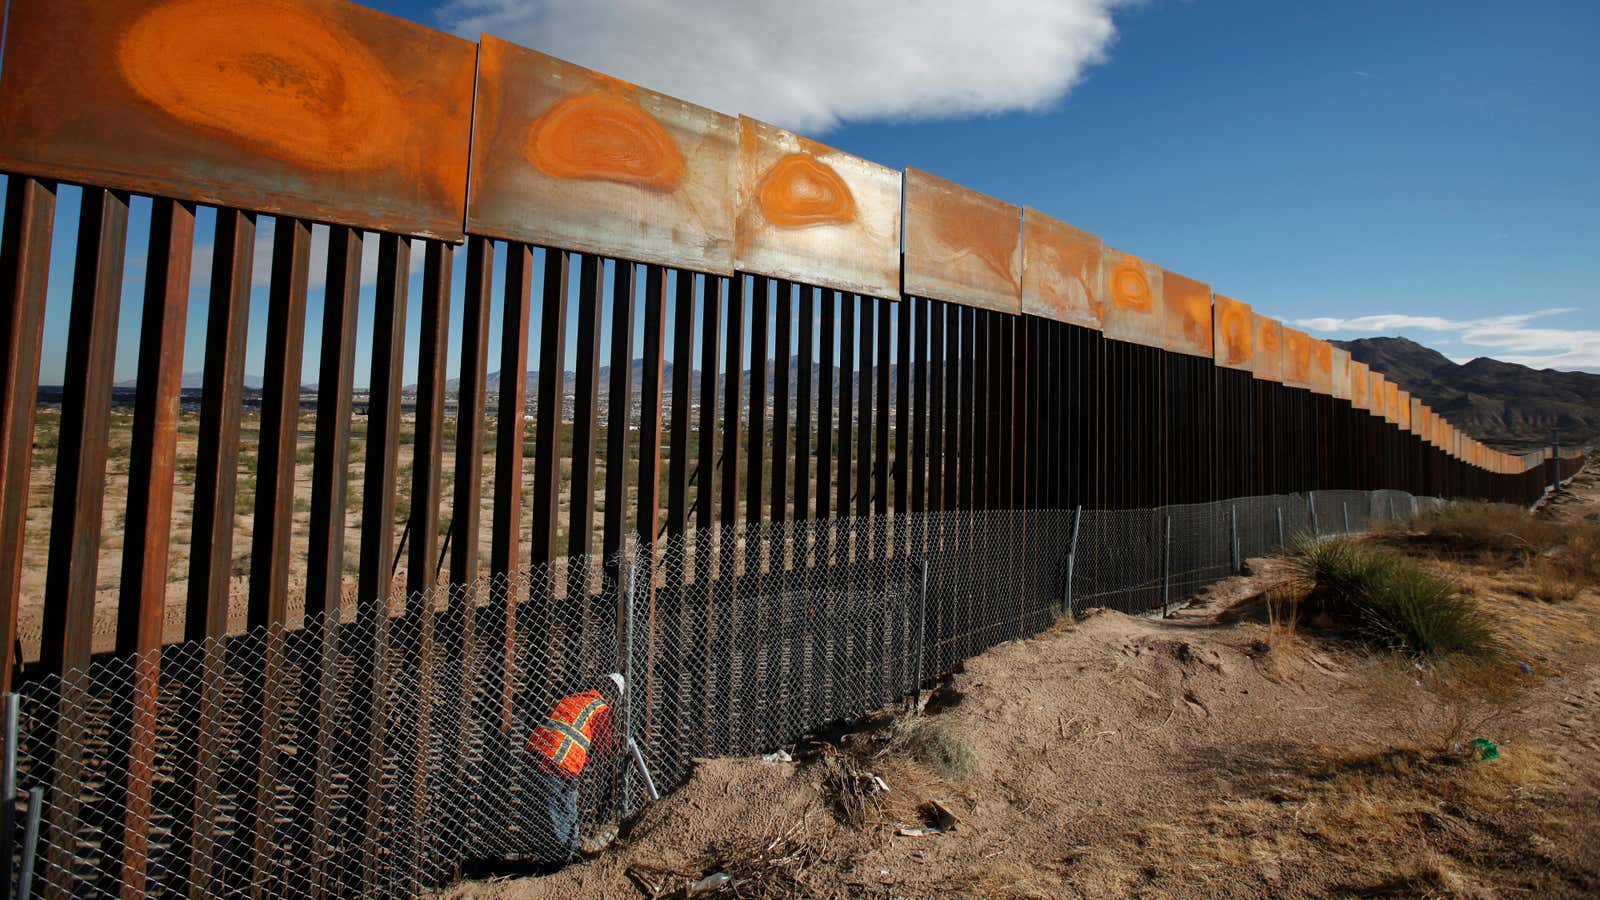 Fewer and fewer Mexicans are attempting to cross this border.